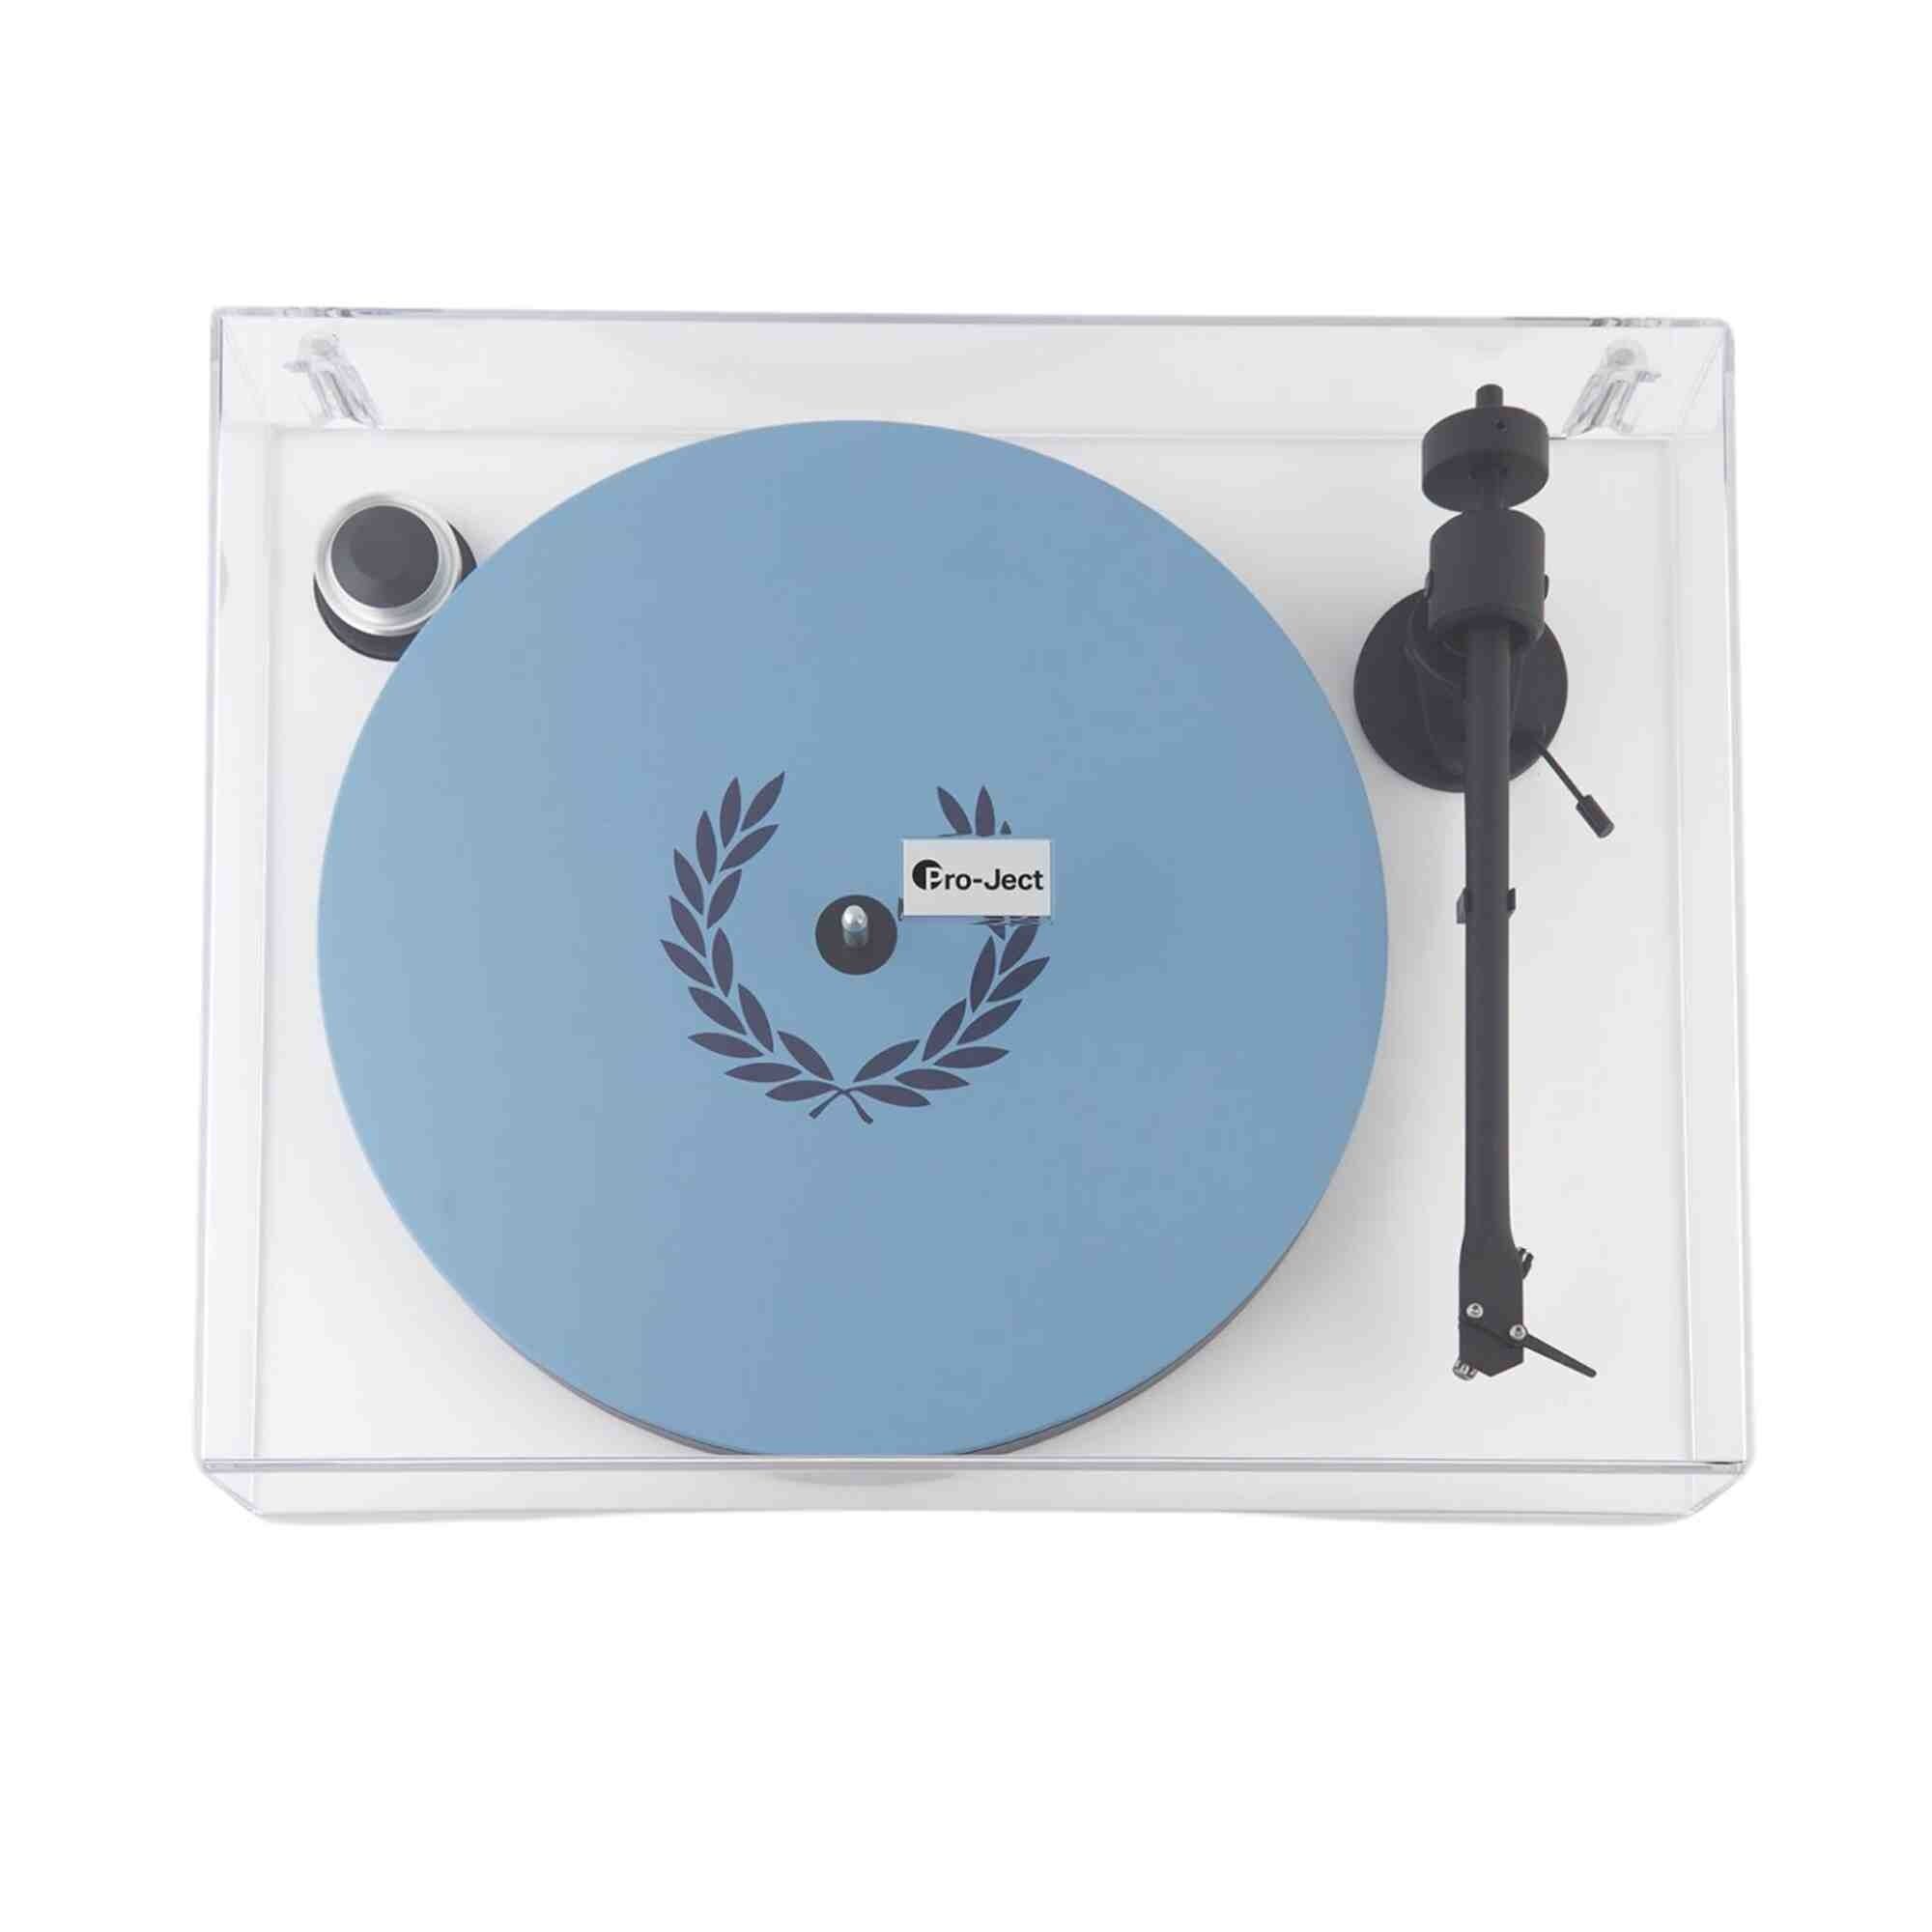 Fred Perry x Pro-Ject Record Player - White - MS2714-710 FP X PR DECK - White - male - Size: One Size